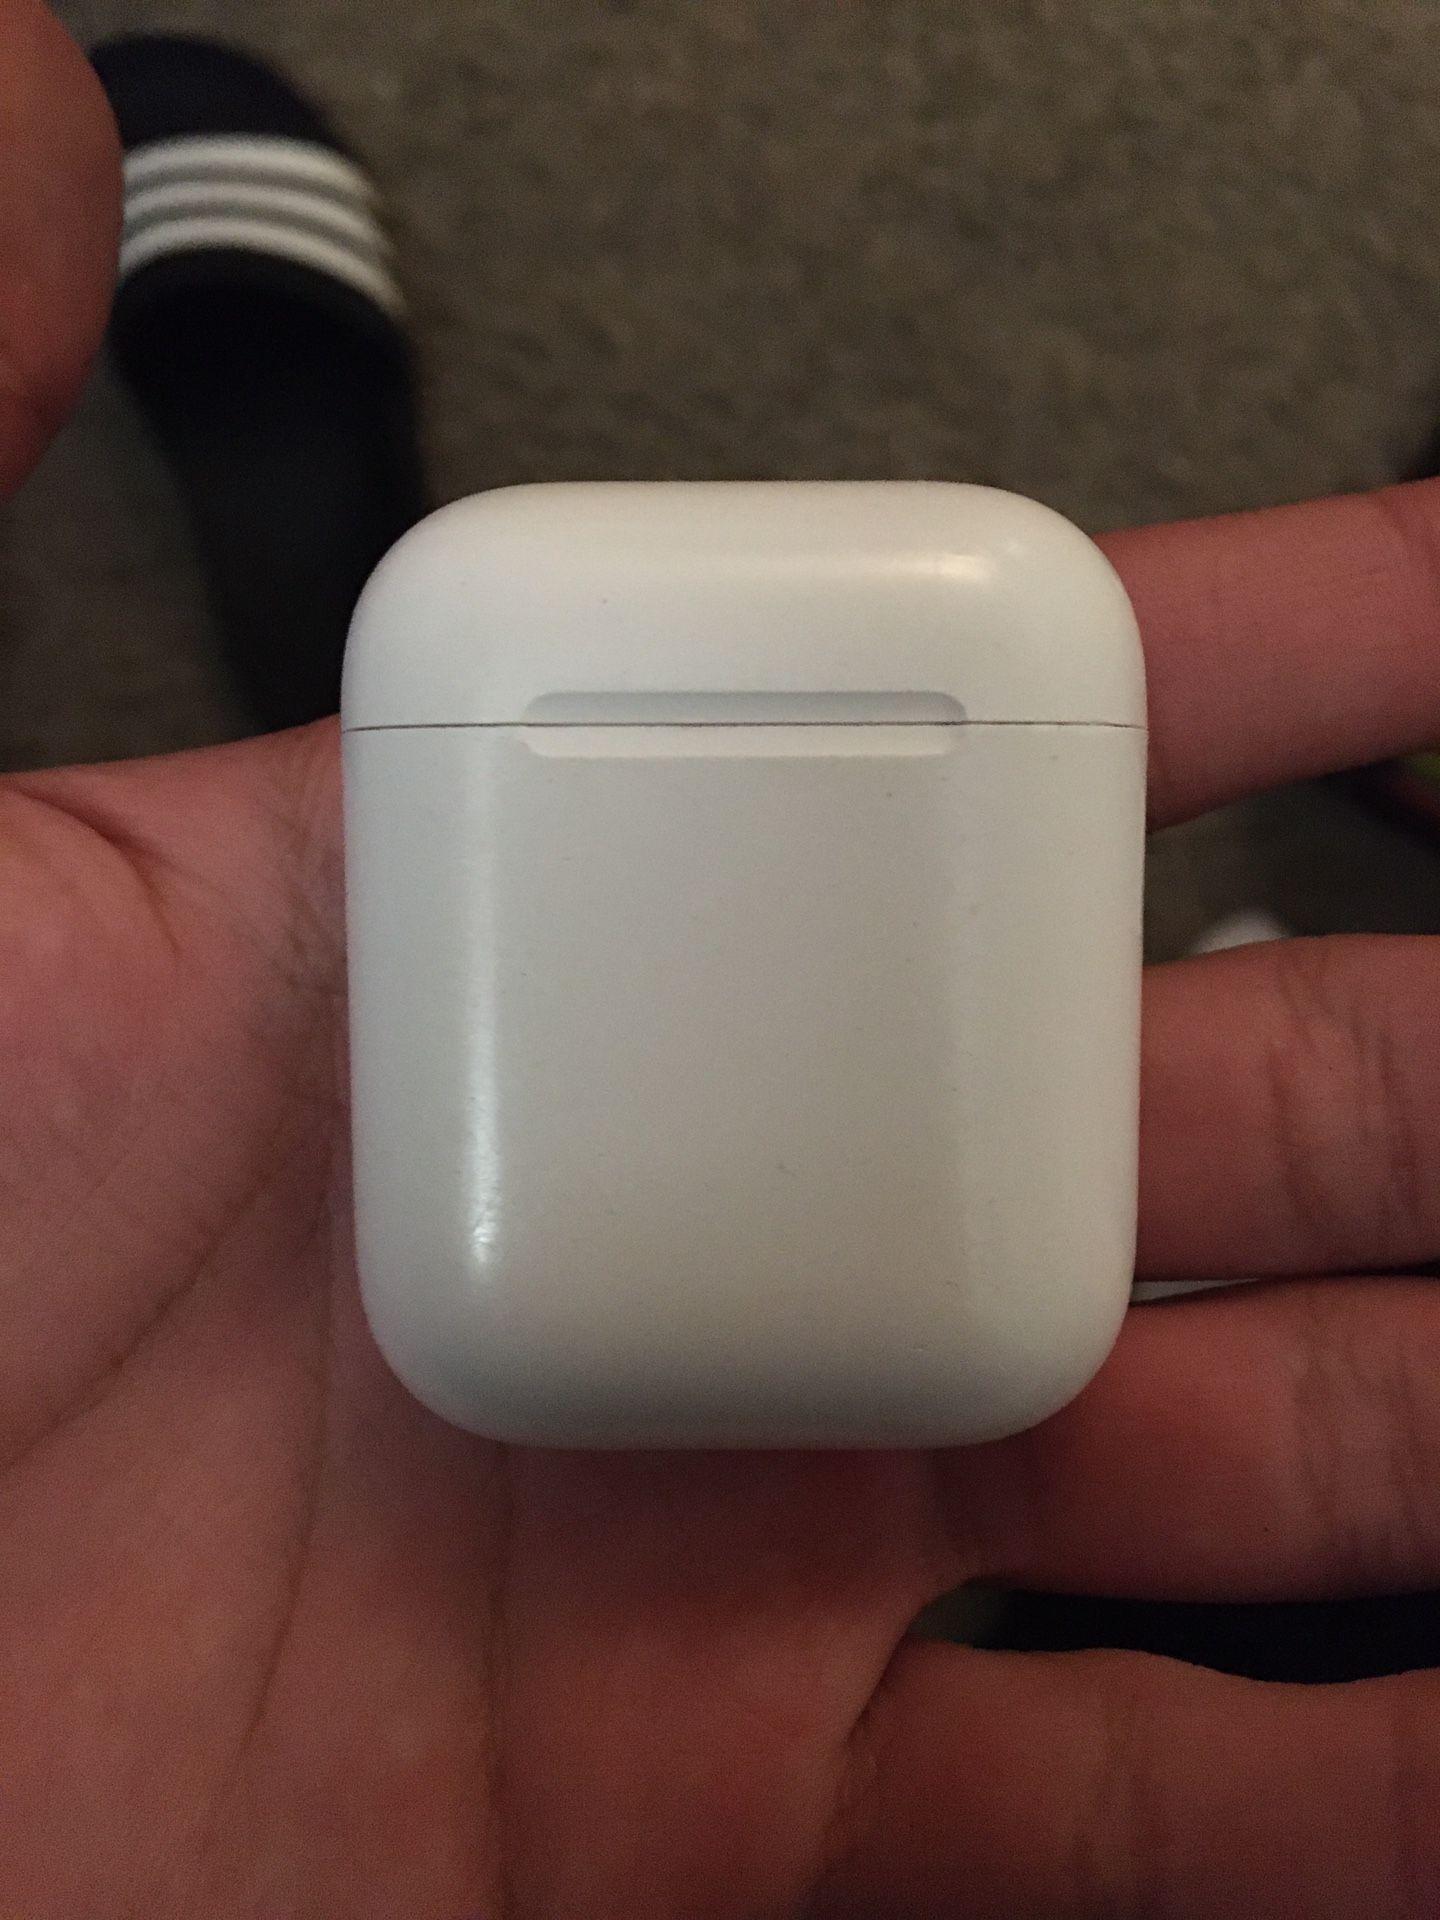 Apple Airpods Wired Charging Case